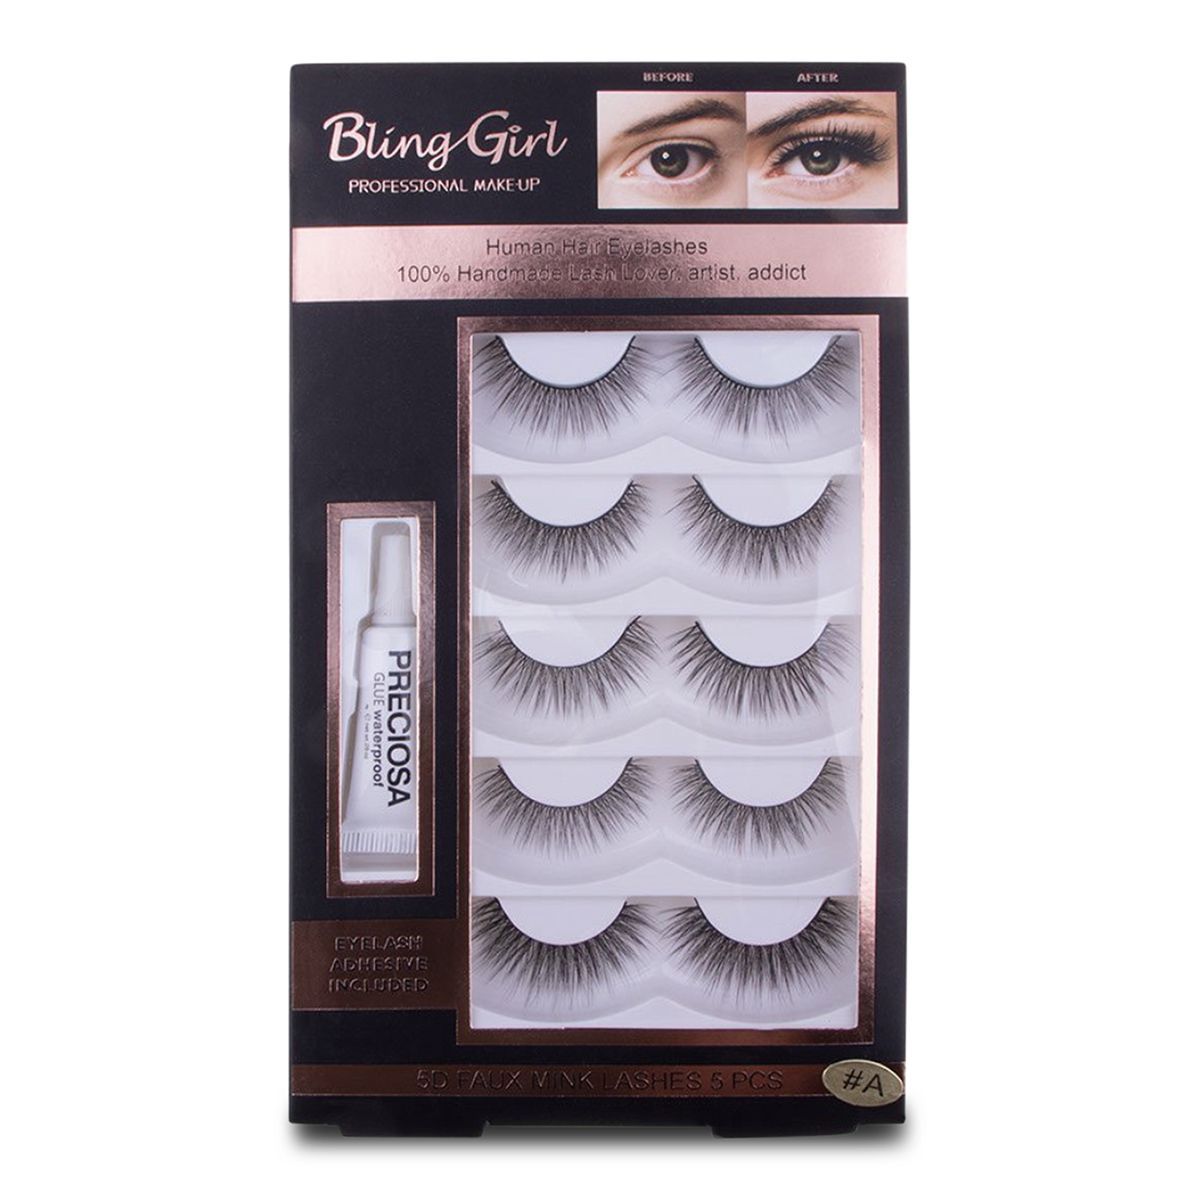 Human Hair Eyelashes and Glue Set - Waterproof - 5 Pairs | Buy Online in  South Africa 